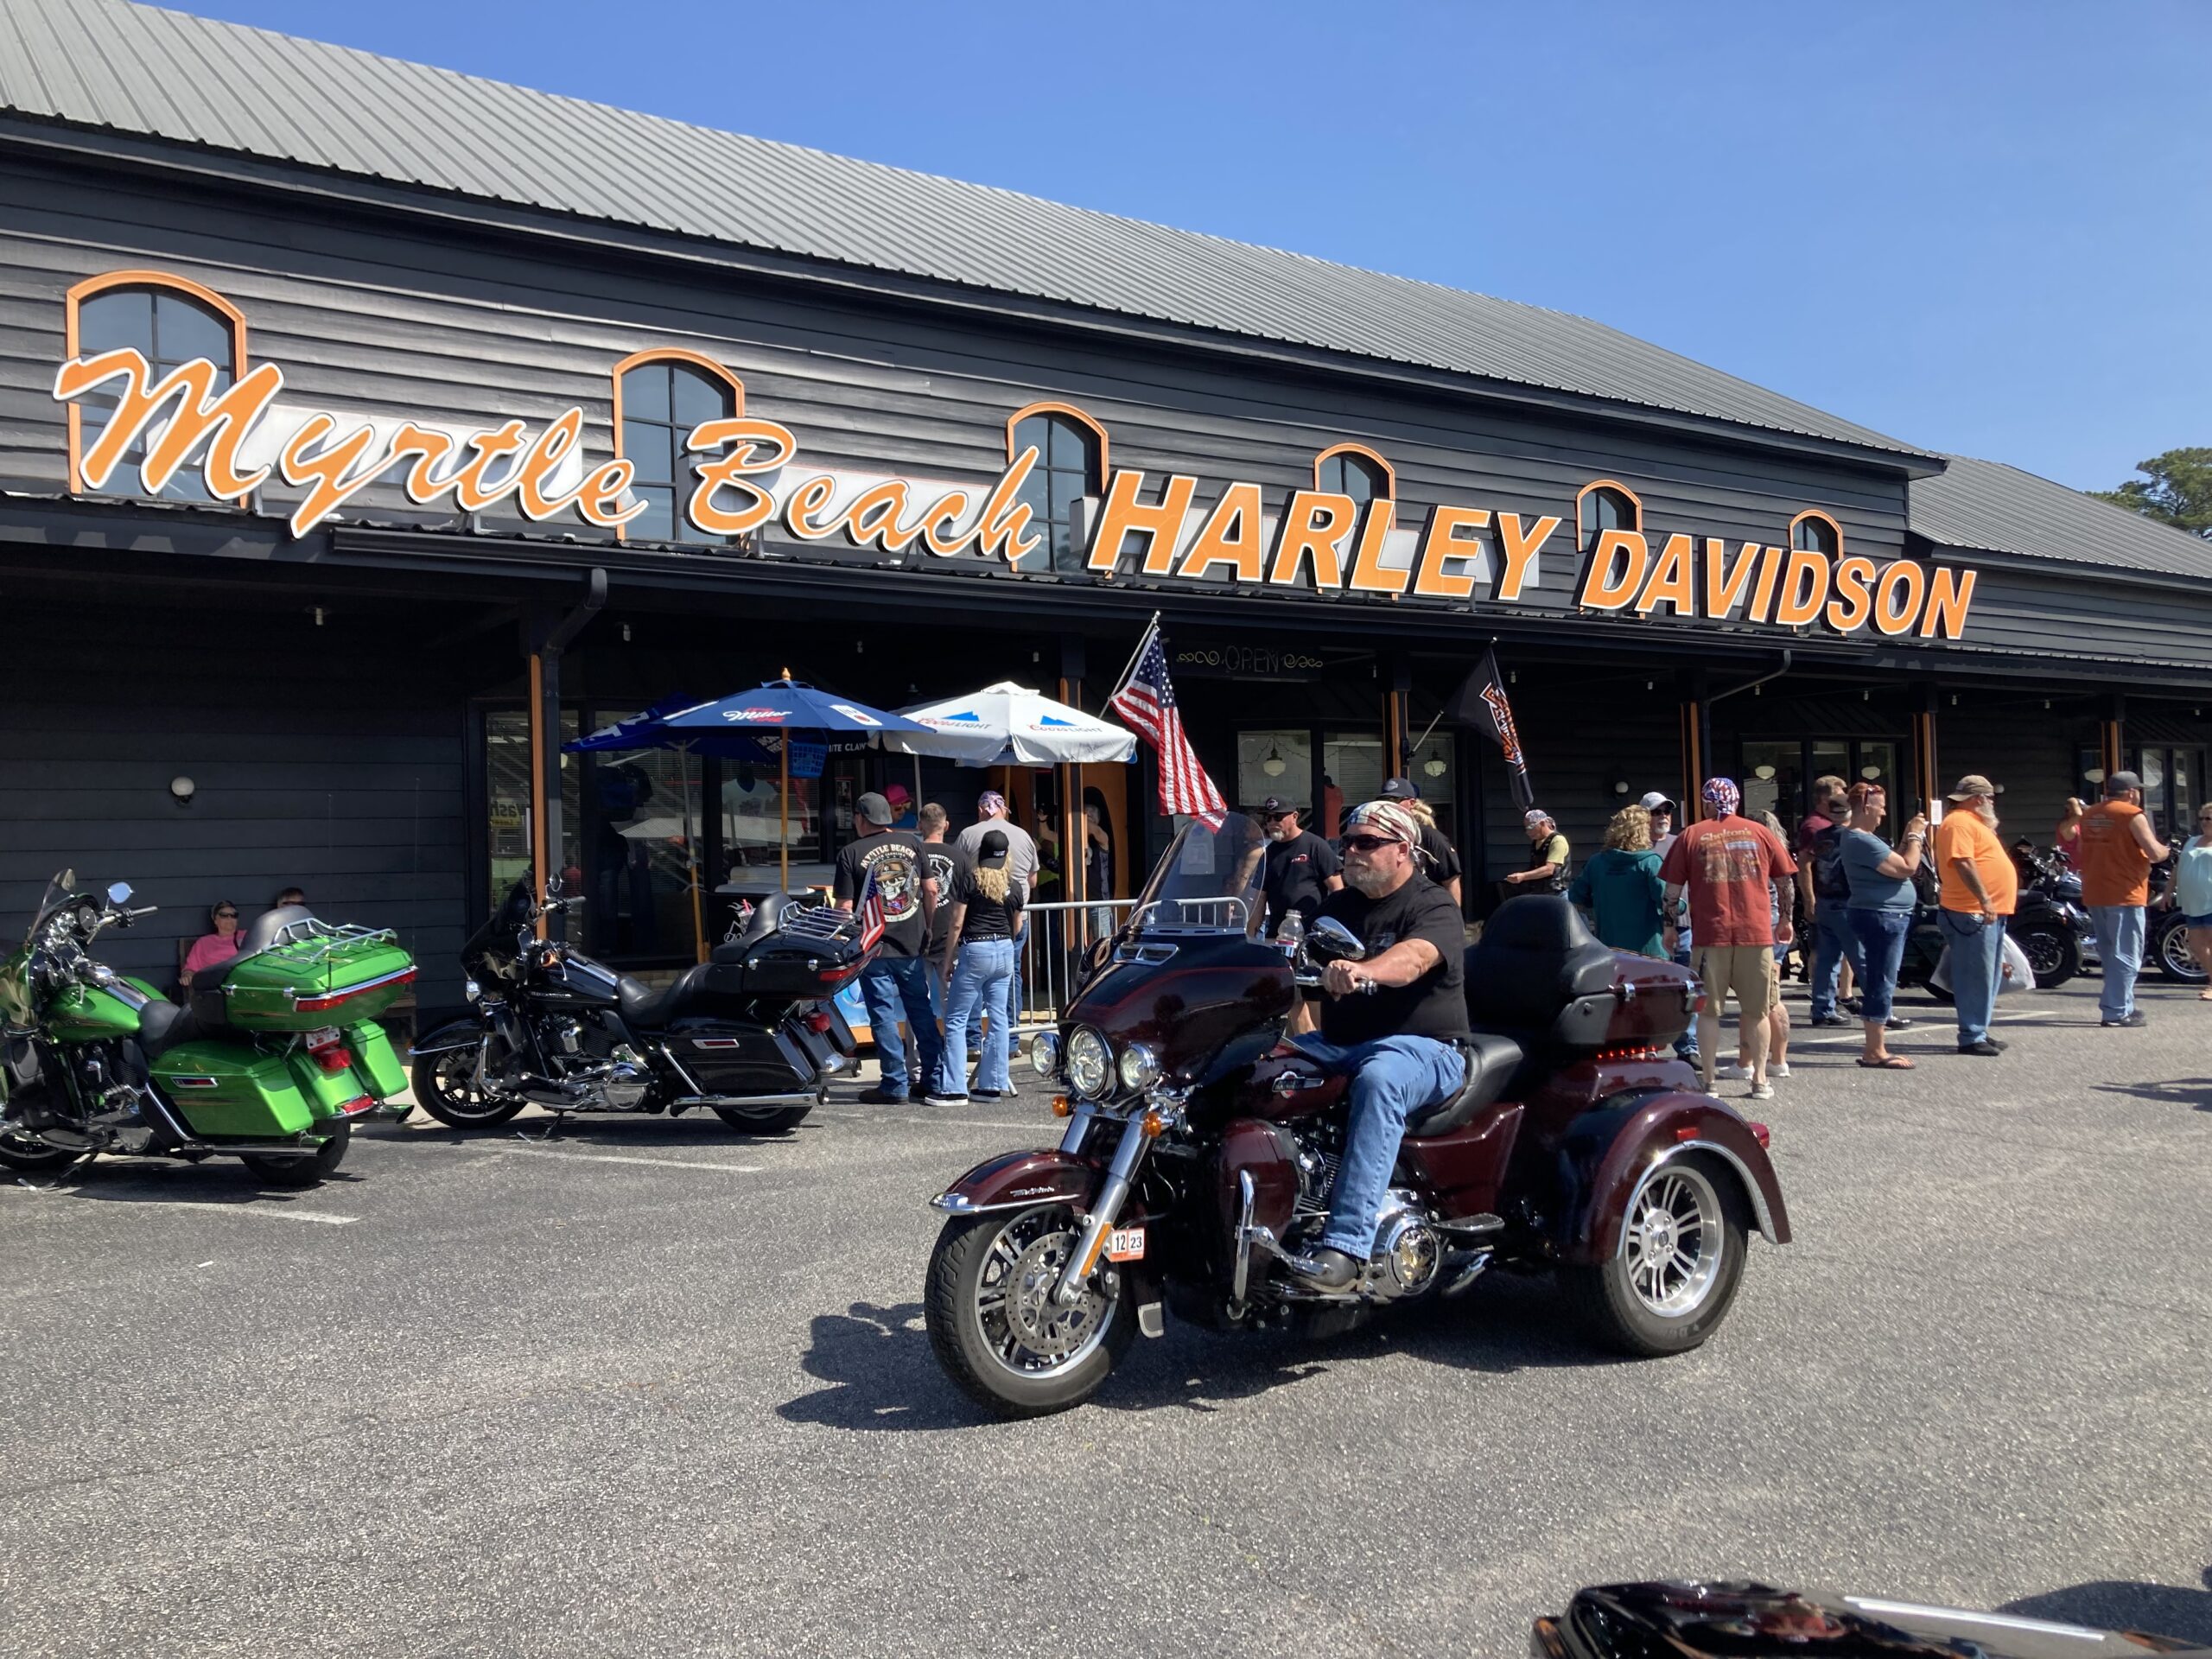 Harley Davidson Bike Week and Murrells Inlet are an annual tradition